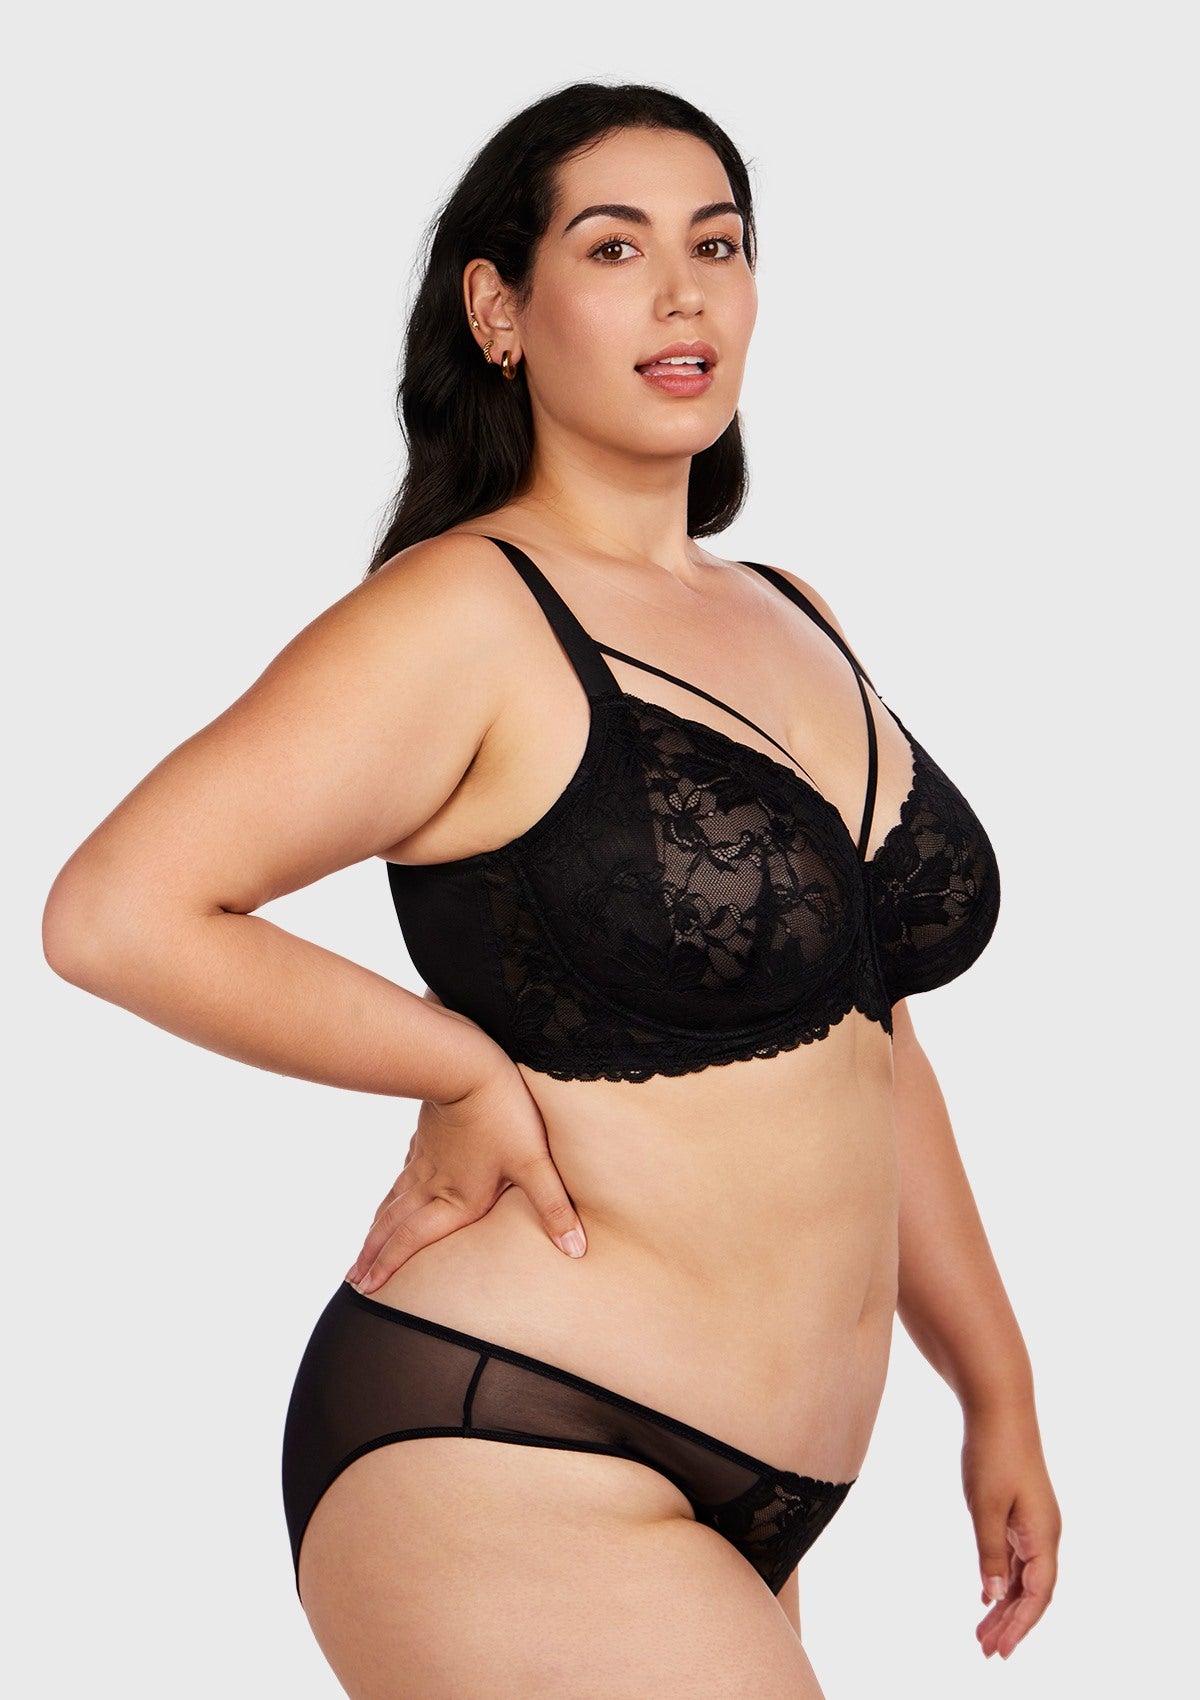 HSIA Pretty In Petals Bra - Plus Size Lingerie For Comfrot And Support - Black / 42 / C